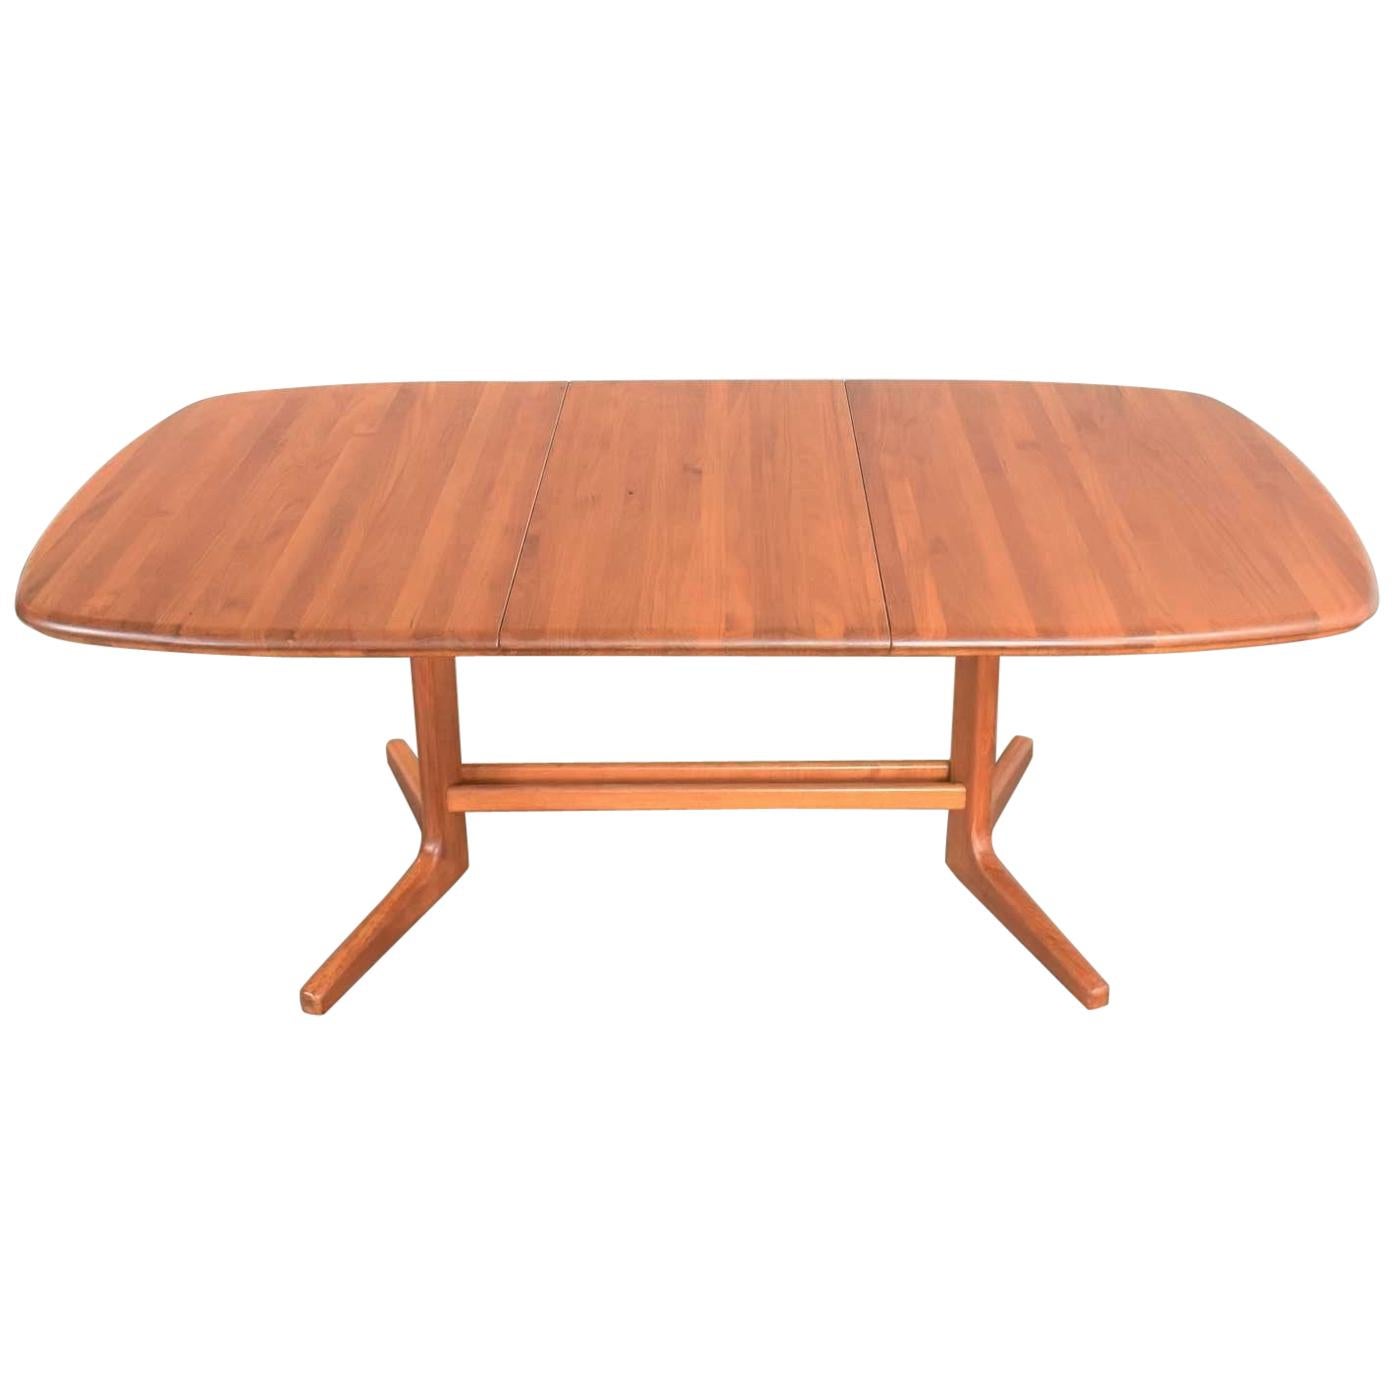 Scandinavian Modern Teak Oval Expanding Dining Table Attributed to Dyrlund